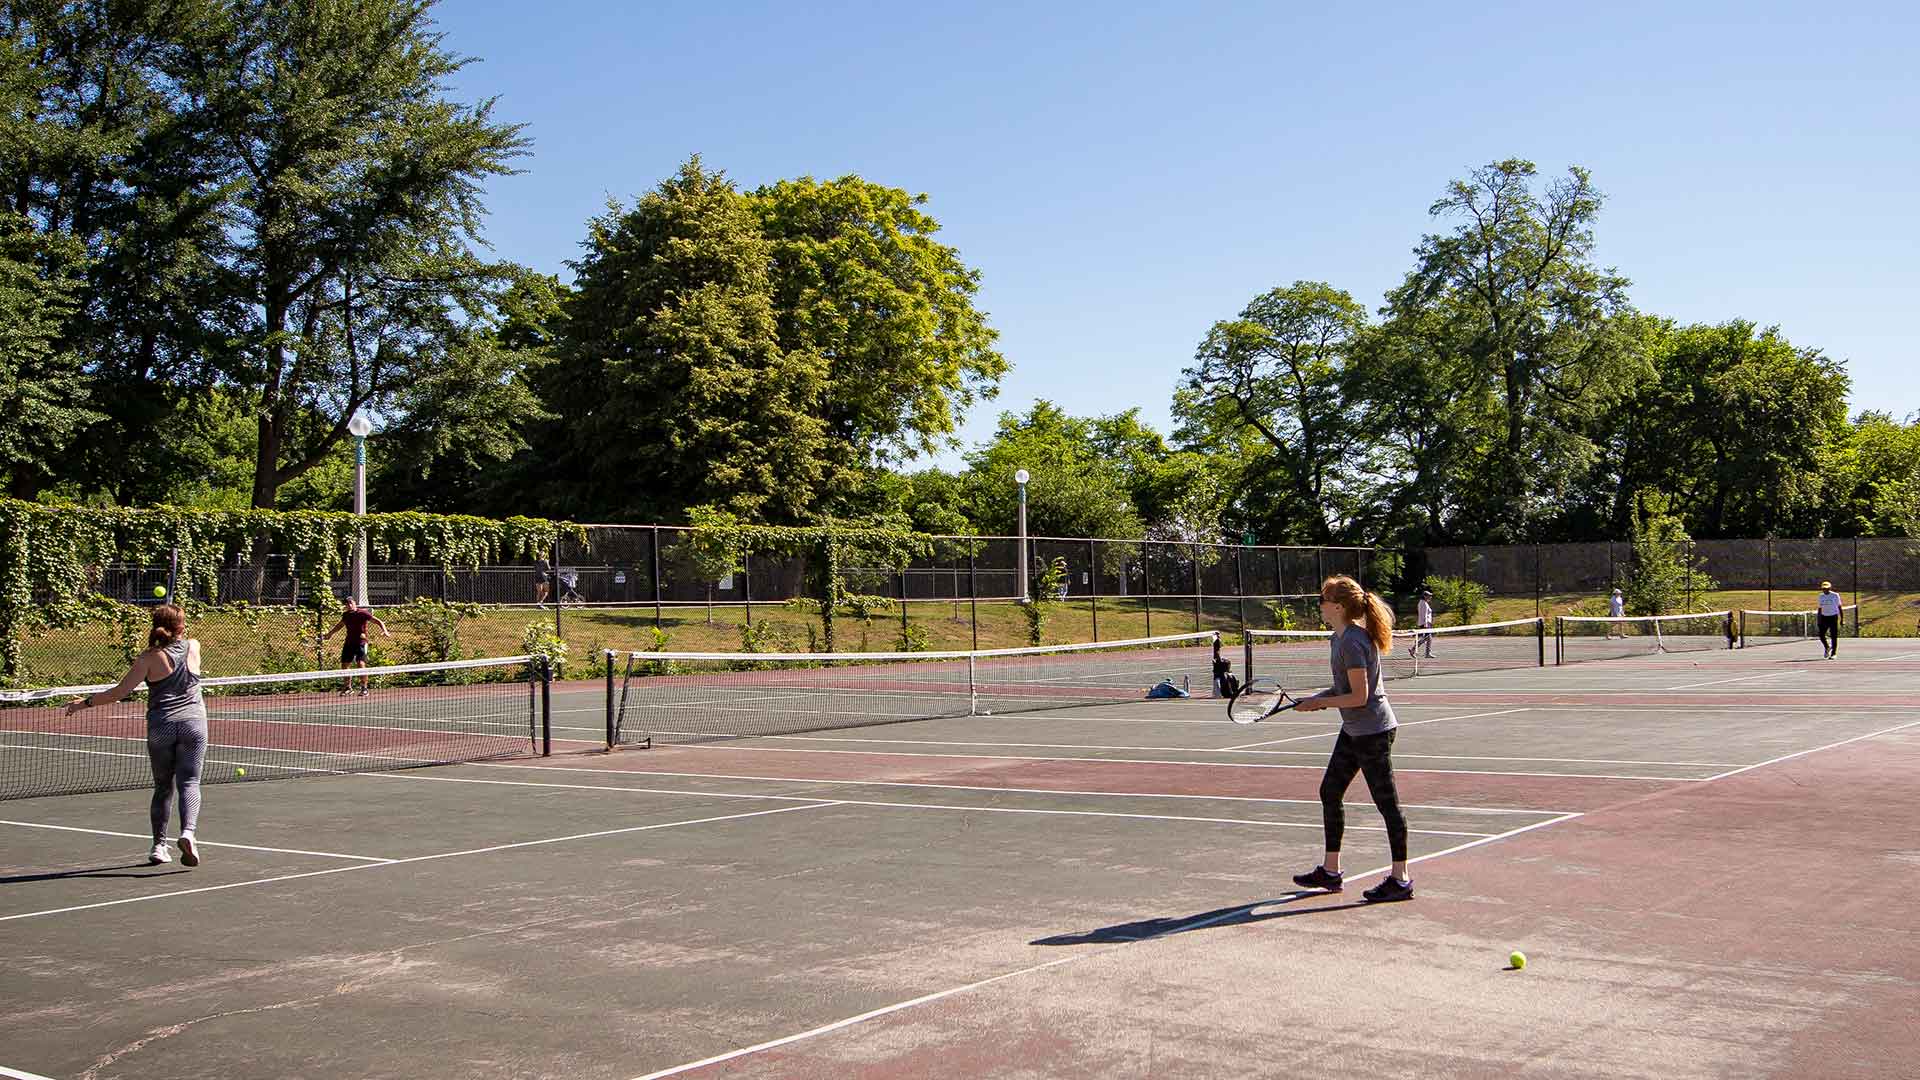 Several people playing tennis on a clear, sunny day.